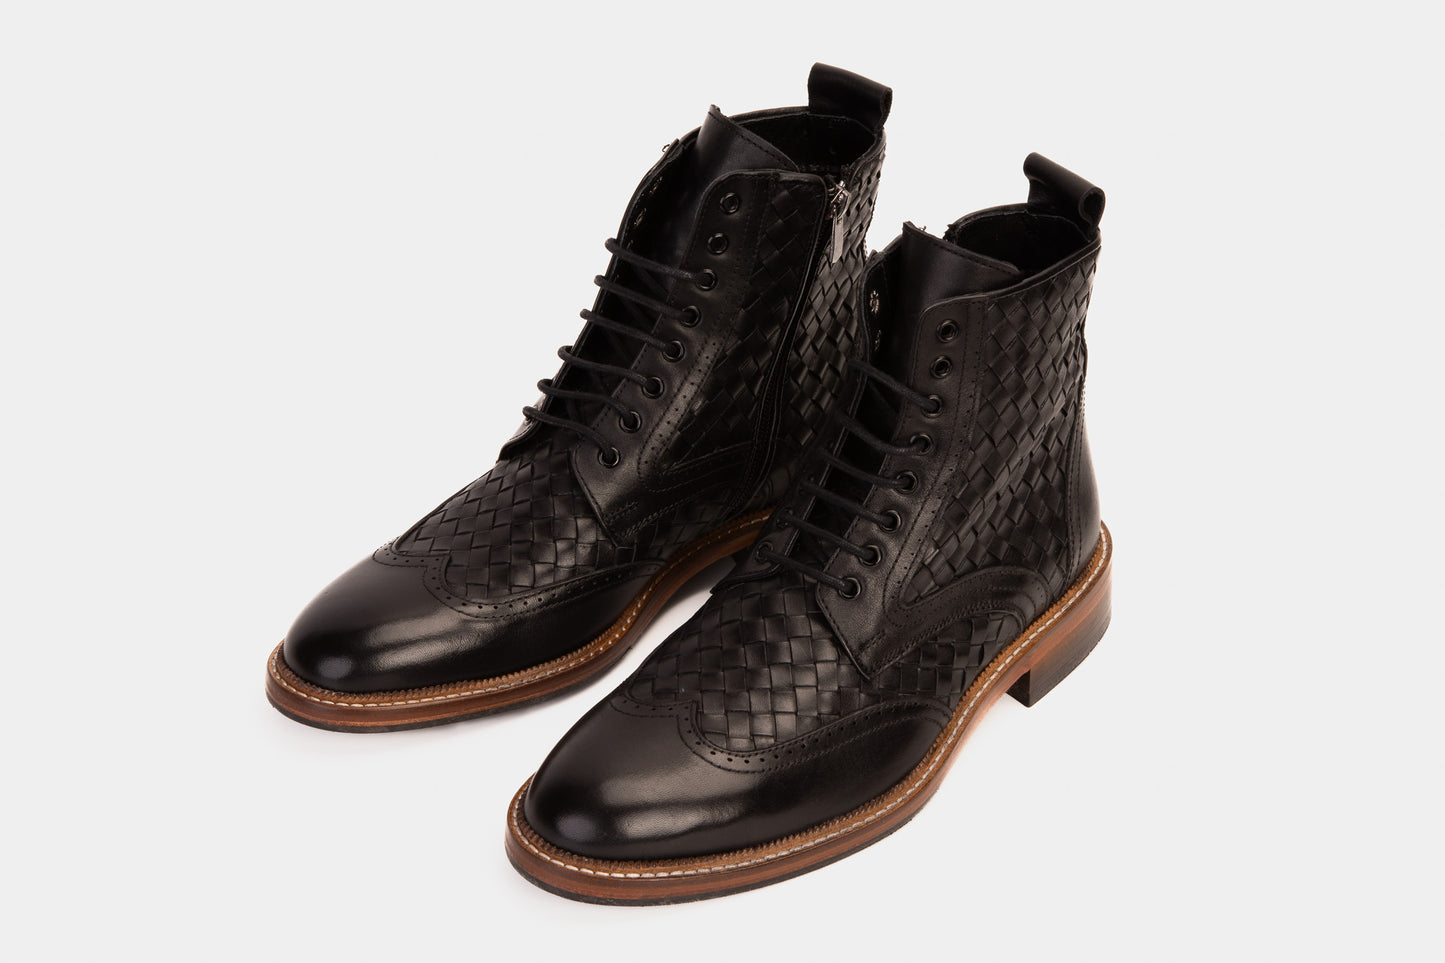 The Loddon Black Leather Wingtip Brogue Handwoven Lace-Up Men Boot with a Zipper